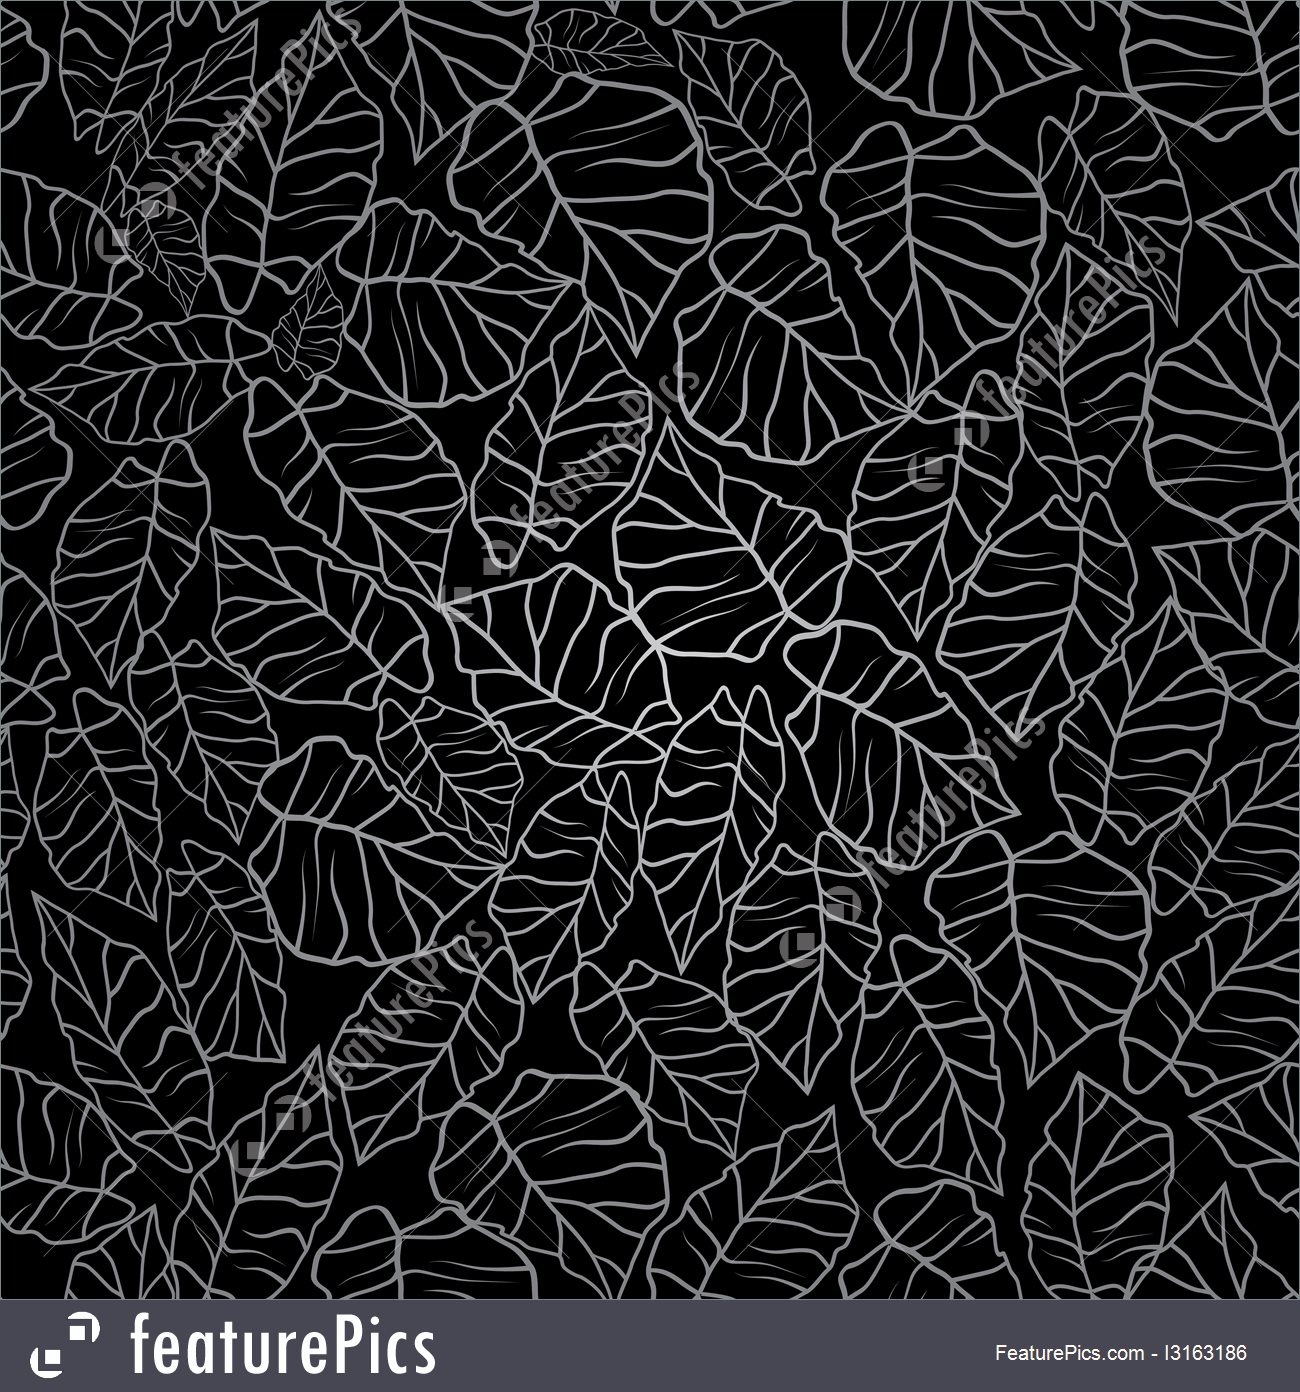 Black Leaf Vintage Texture - Free Seamless Pattern Abstract Black Background - HD Wallpaper 